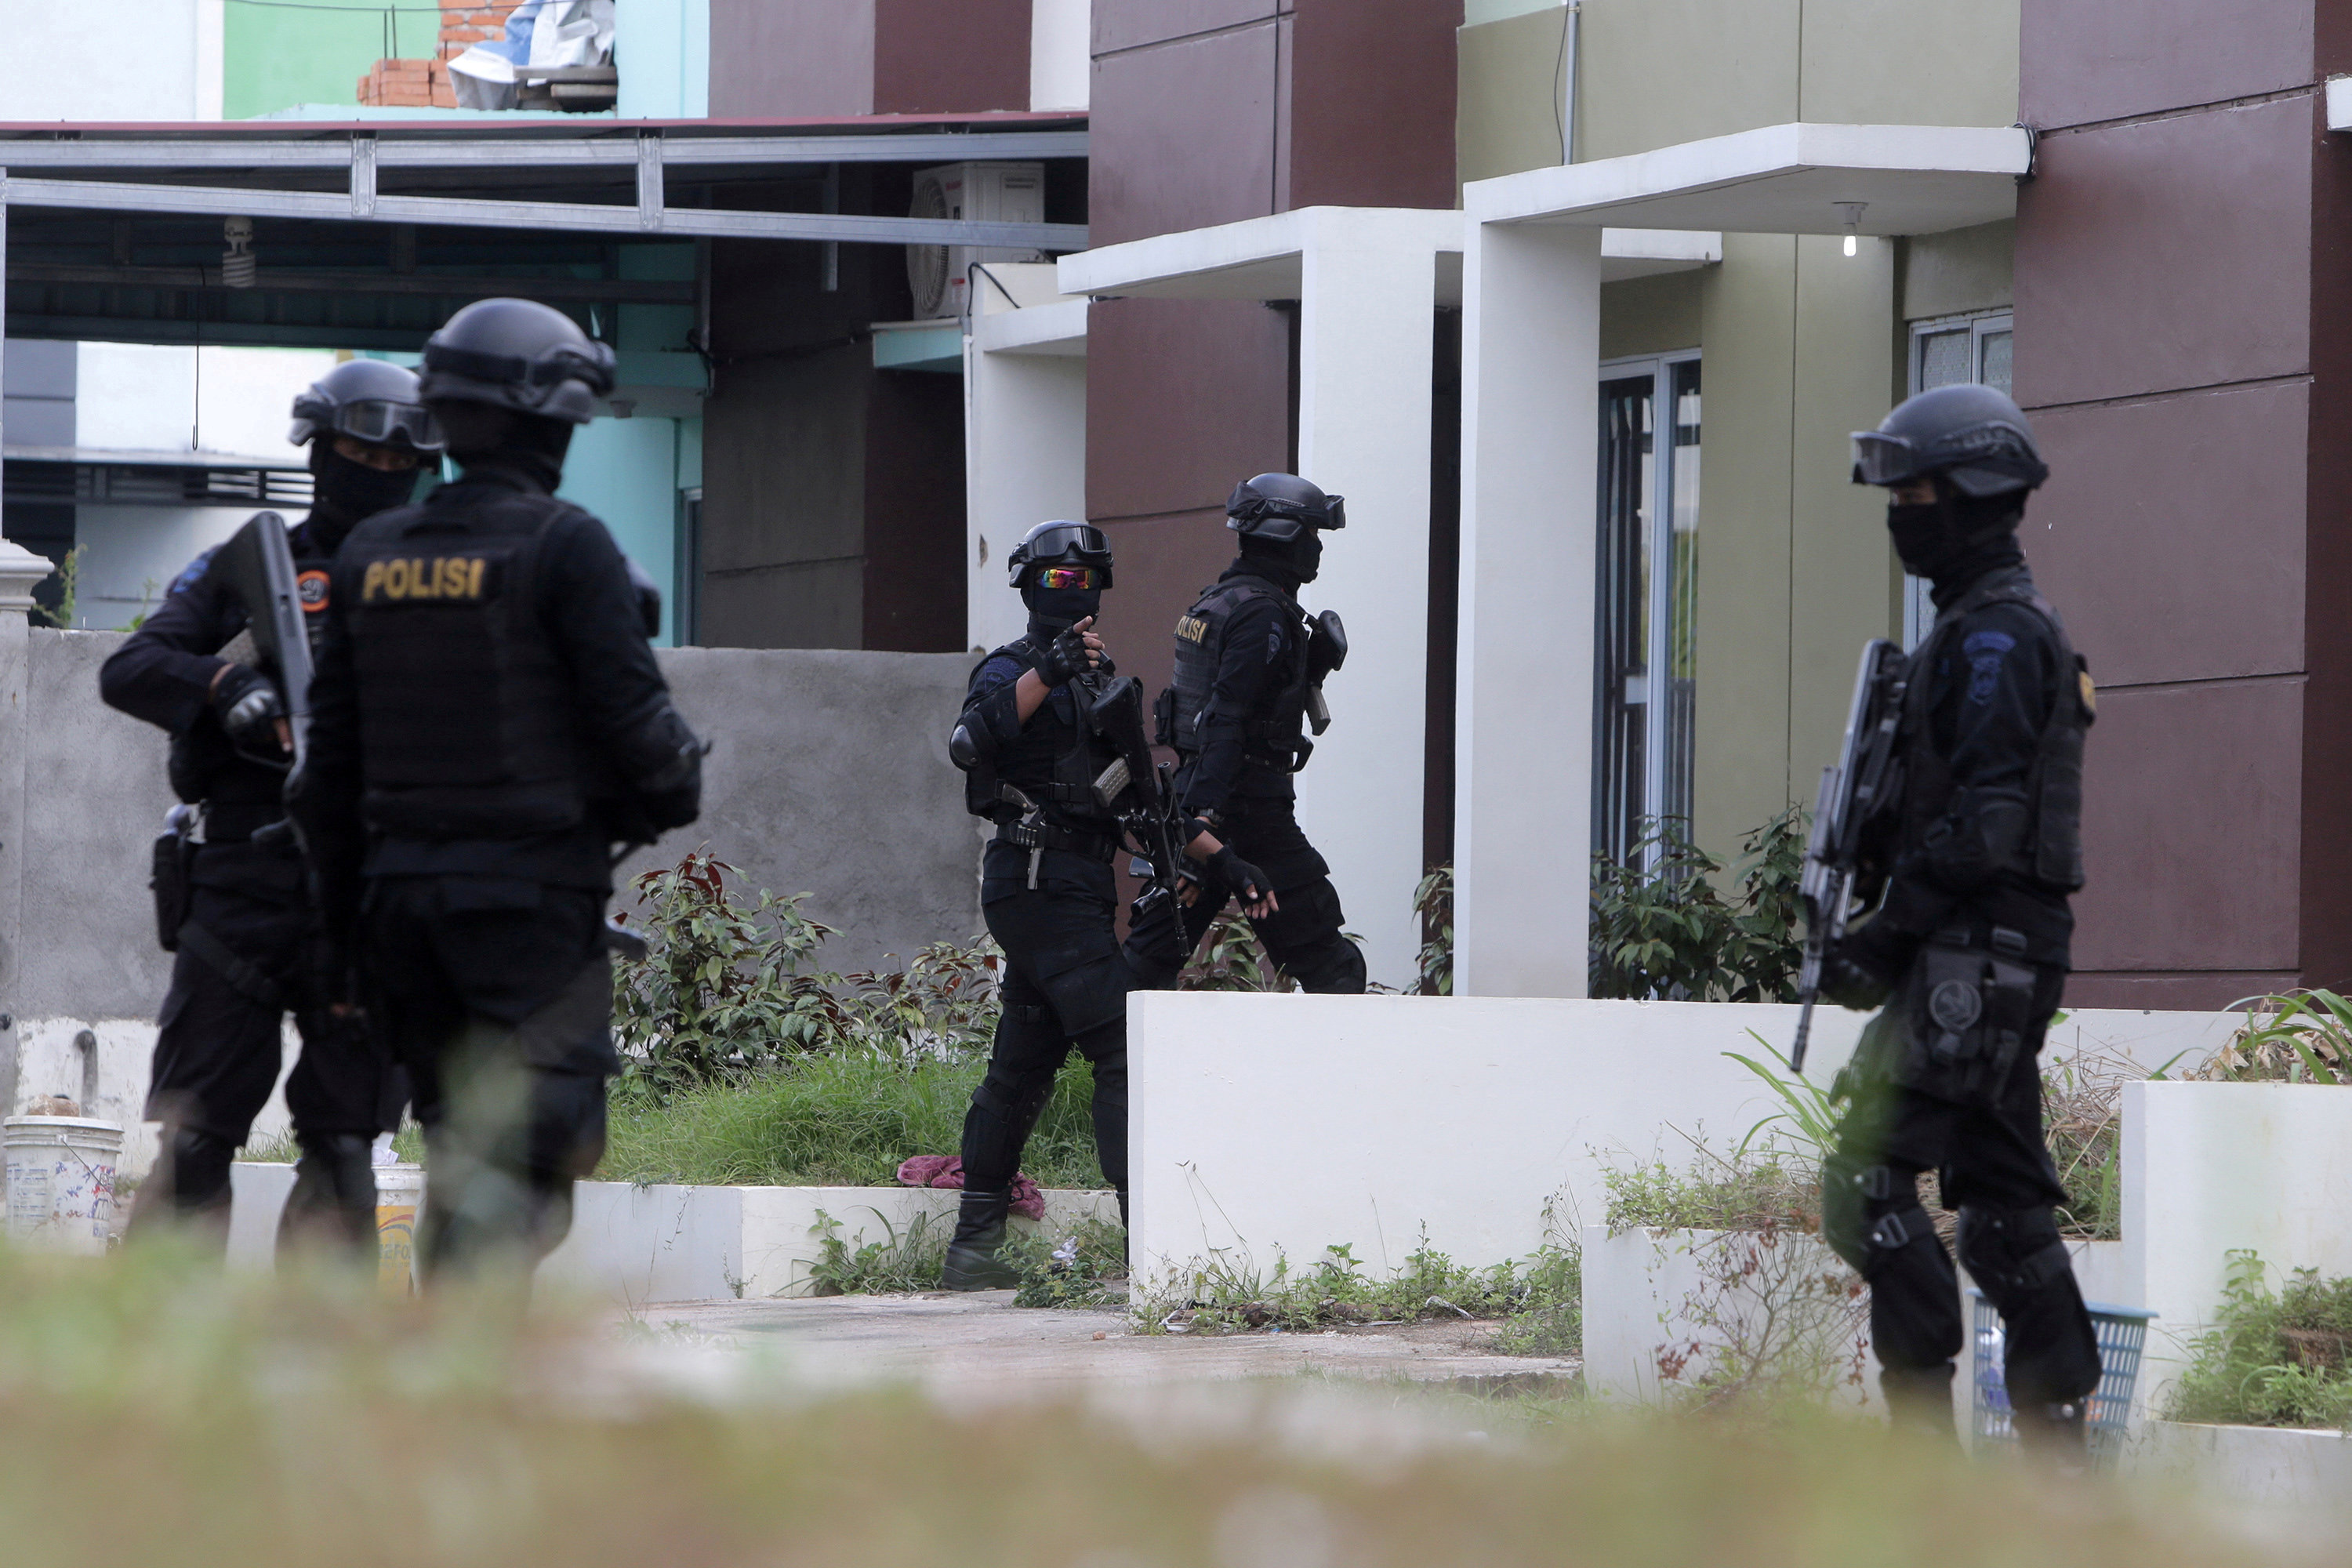  Indonesian anti-terror police from Detachment 88 are seen entering a building during a raid in Batam, Riau Islands, Indonesia, August 5, 2016 in this photo taken by Antara Foto. Antara Foto/M N Kanwa/via REUTERS/File Photo ATTENTION EDITORS - THIS IMAGE 